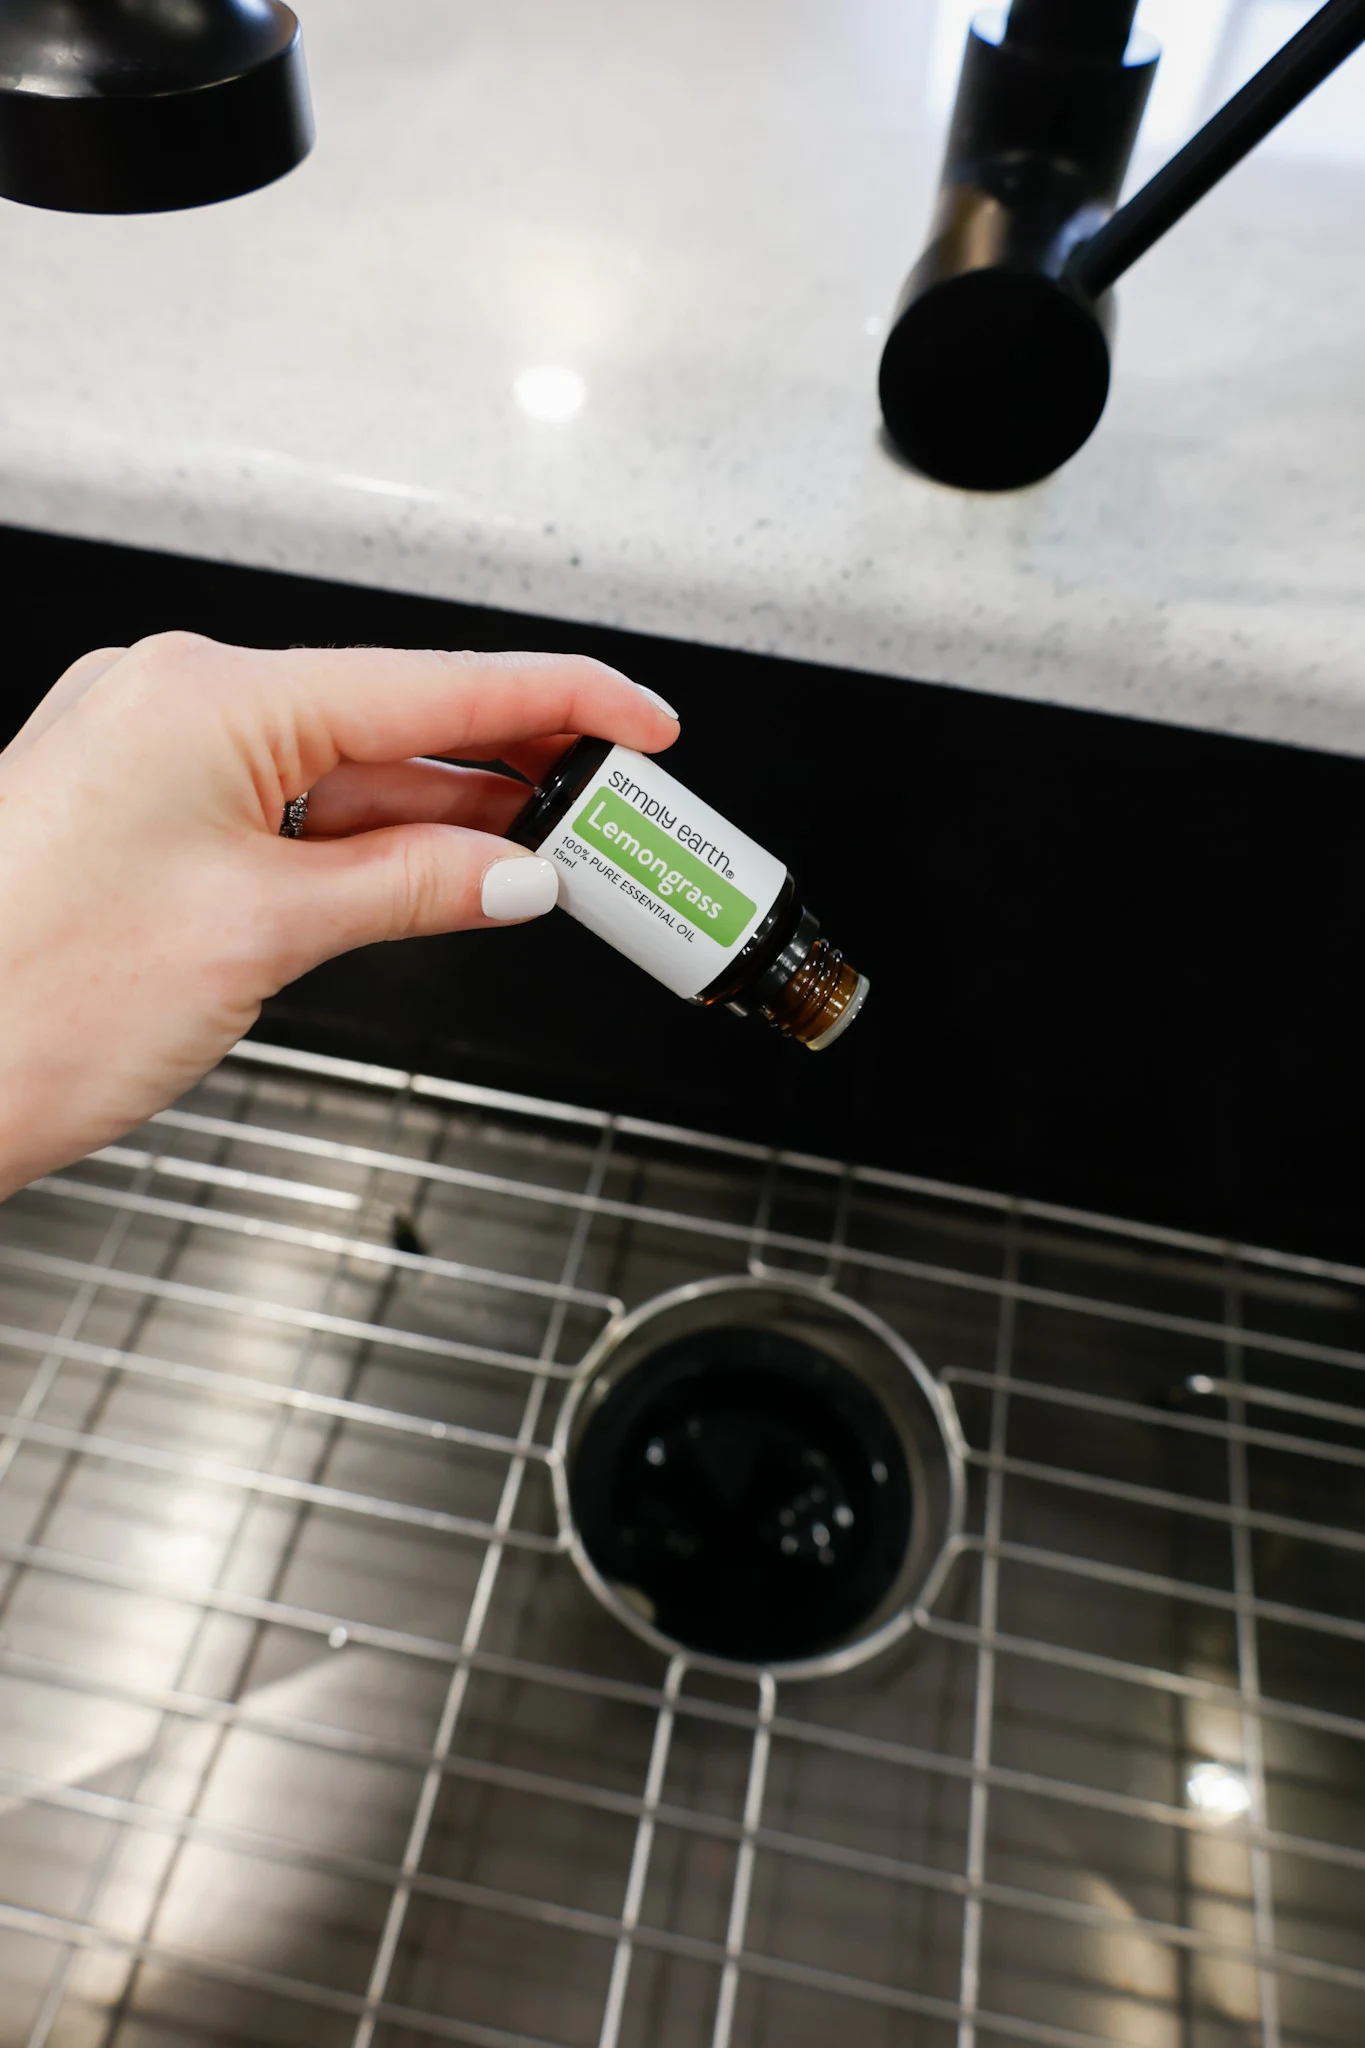 pouring lemongrass essential oil into garbage disposal